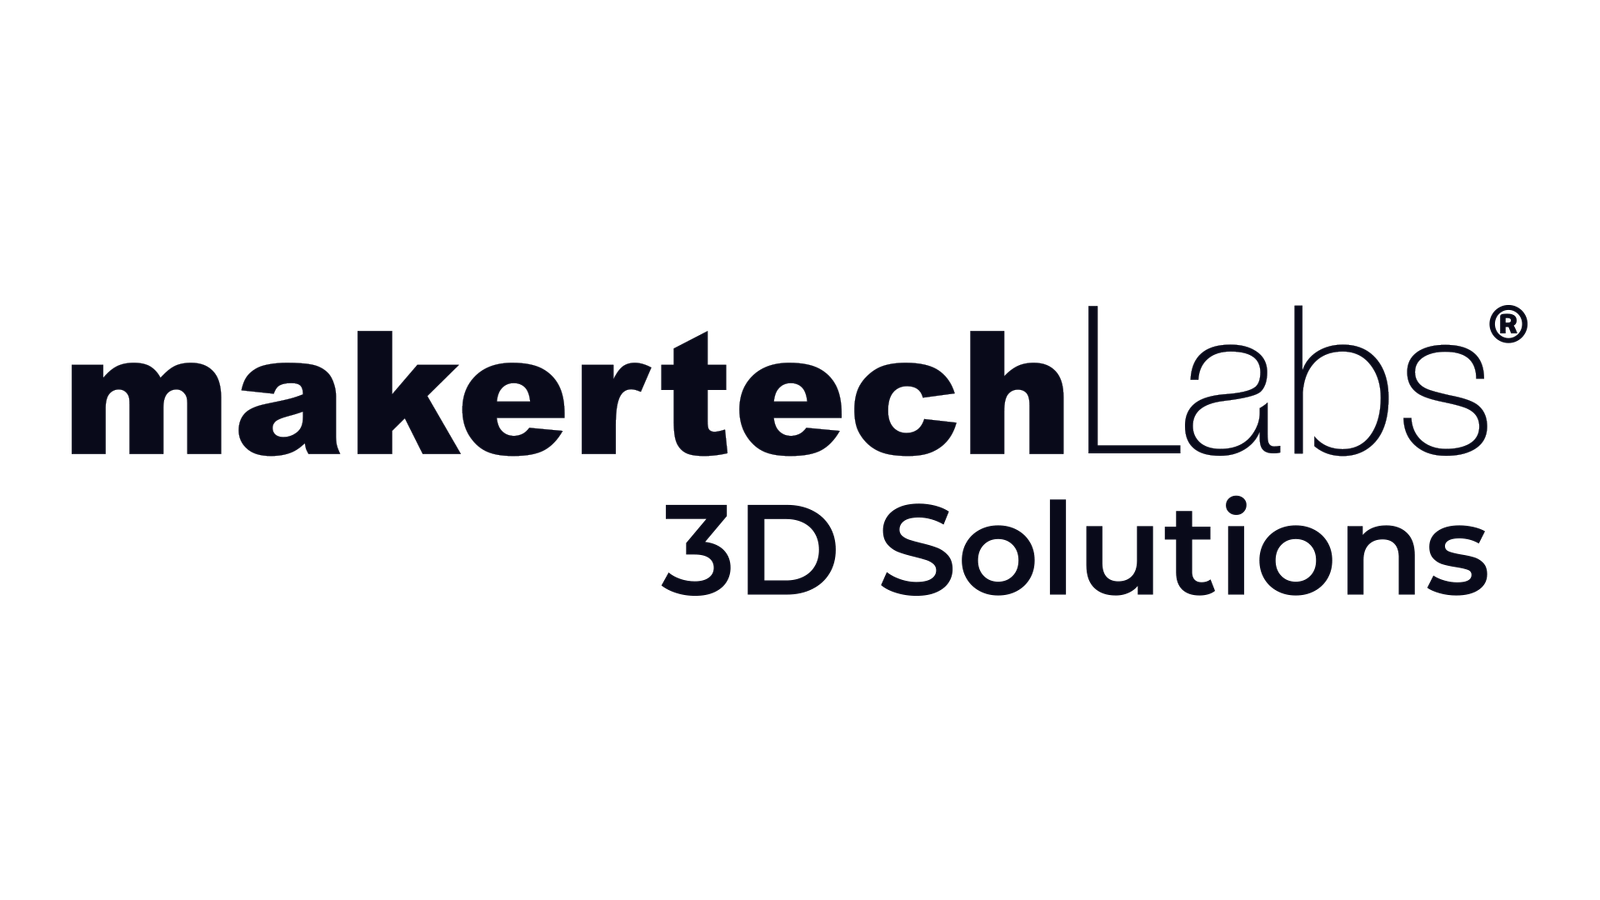 Logo_Makertechlabs_3D_Solutions_2_-_Black.png